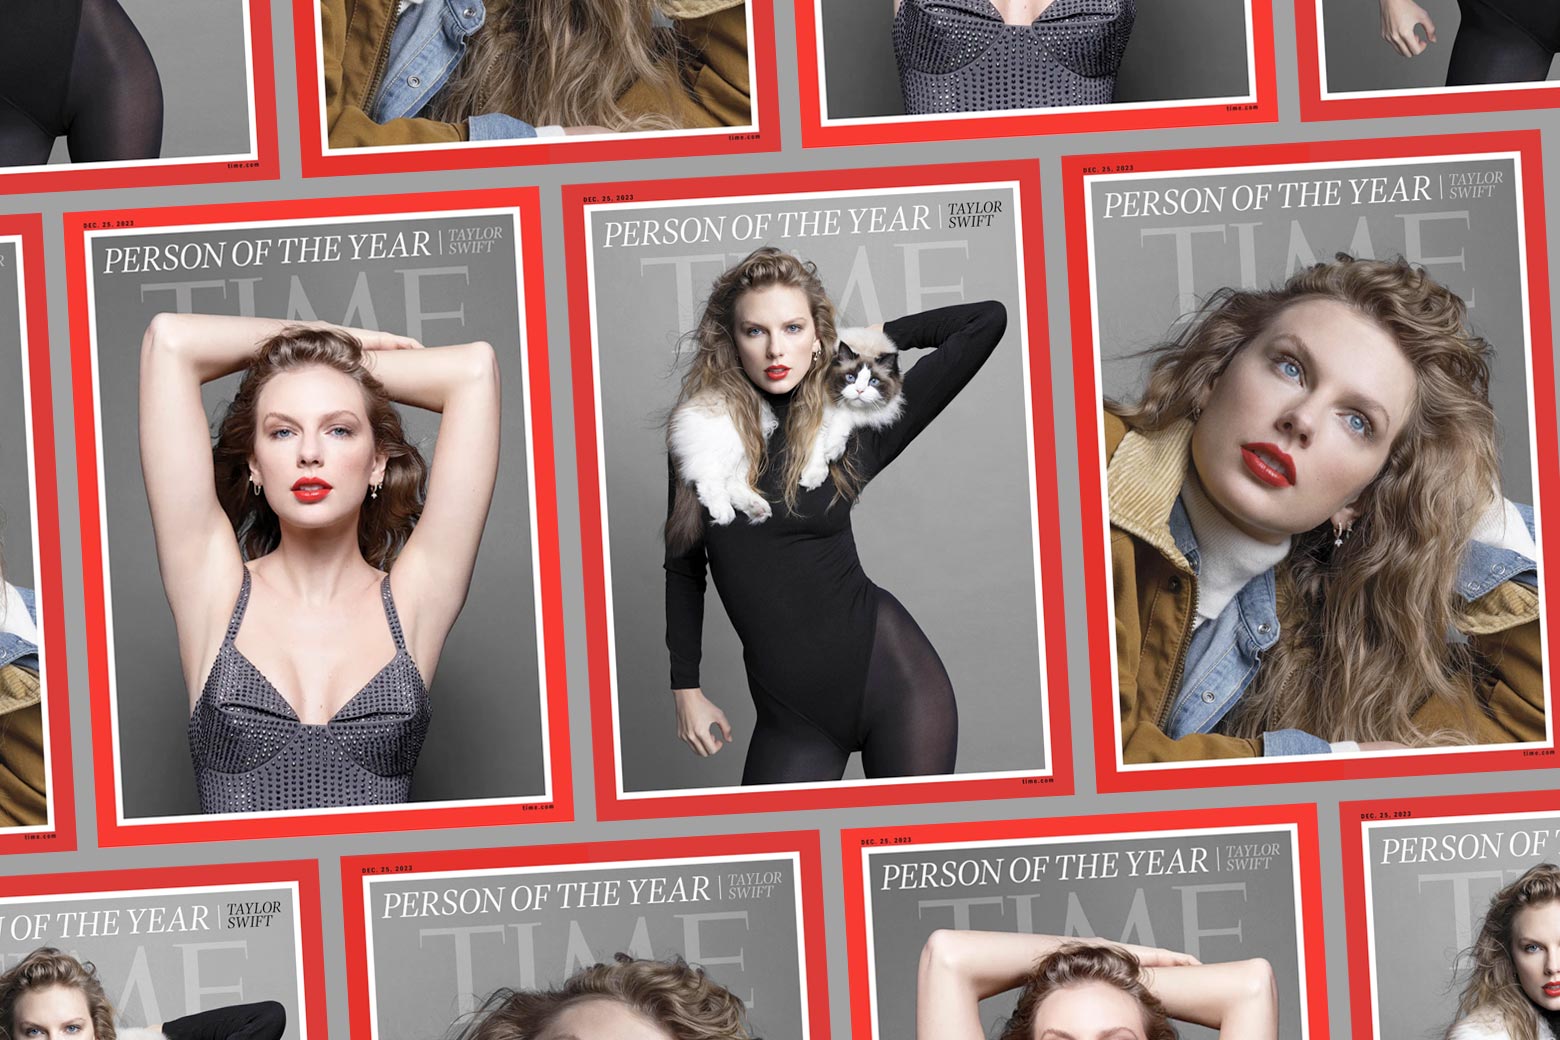 A collage of Time’s three collectible Person of the Year covers for Taylor Swift. In one, she leans on an elbow wearing a cozy tan Western jacket over a denim shirt and white turtleneck sweater. In another, she wears a sparkly top with spaghetti straps, her arms crossed behind her head. In the last one, she wears a black leotard and tights, looking fierce, with her cat draped around her neck.